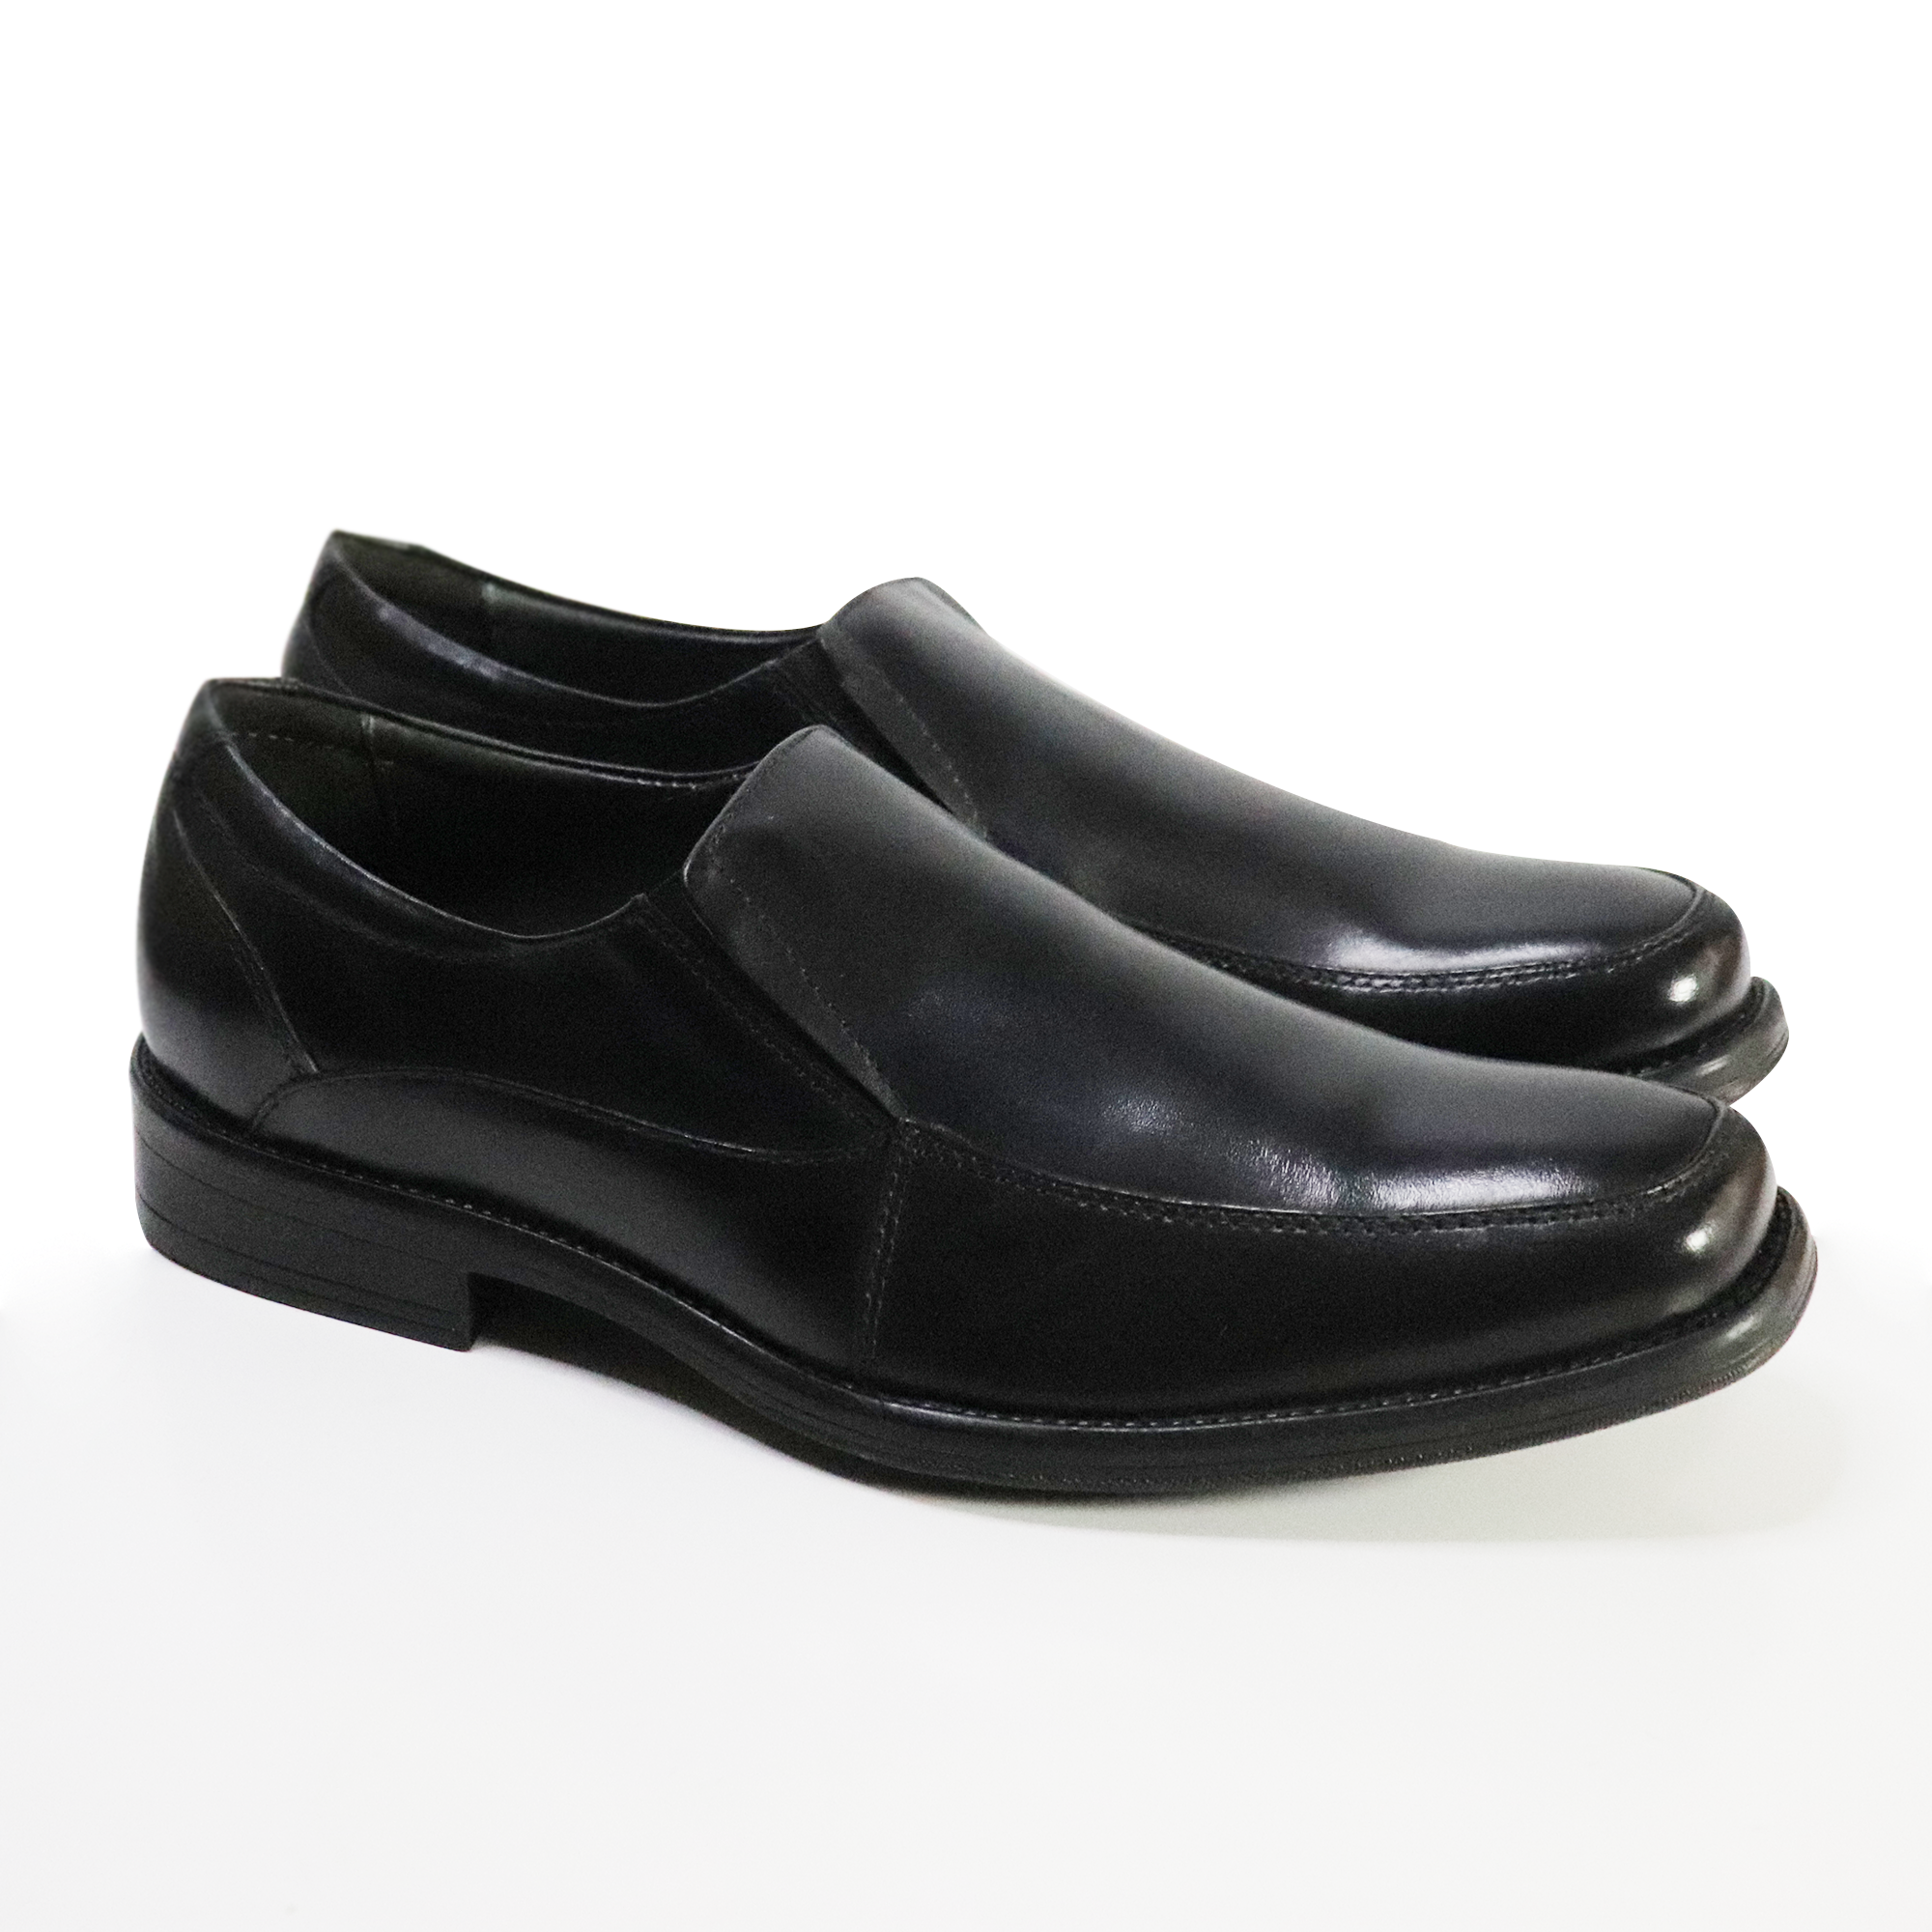 Men's New Gallus Genuine Leather Shoes Hand Crafted to perfection by renowned Mont Hawk Artisans. Loafers/Slip On